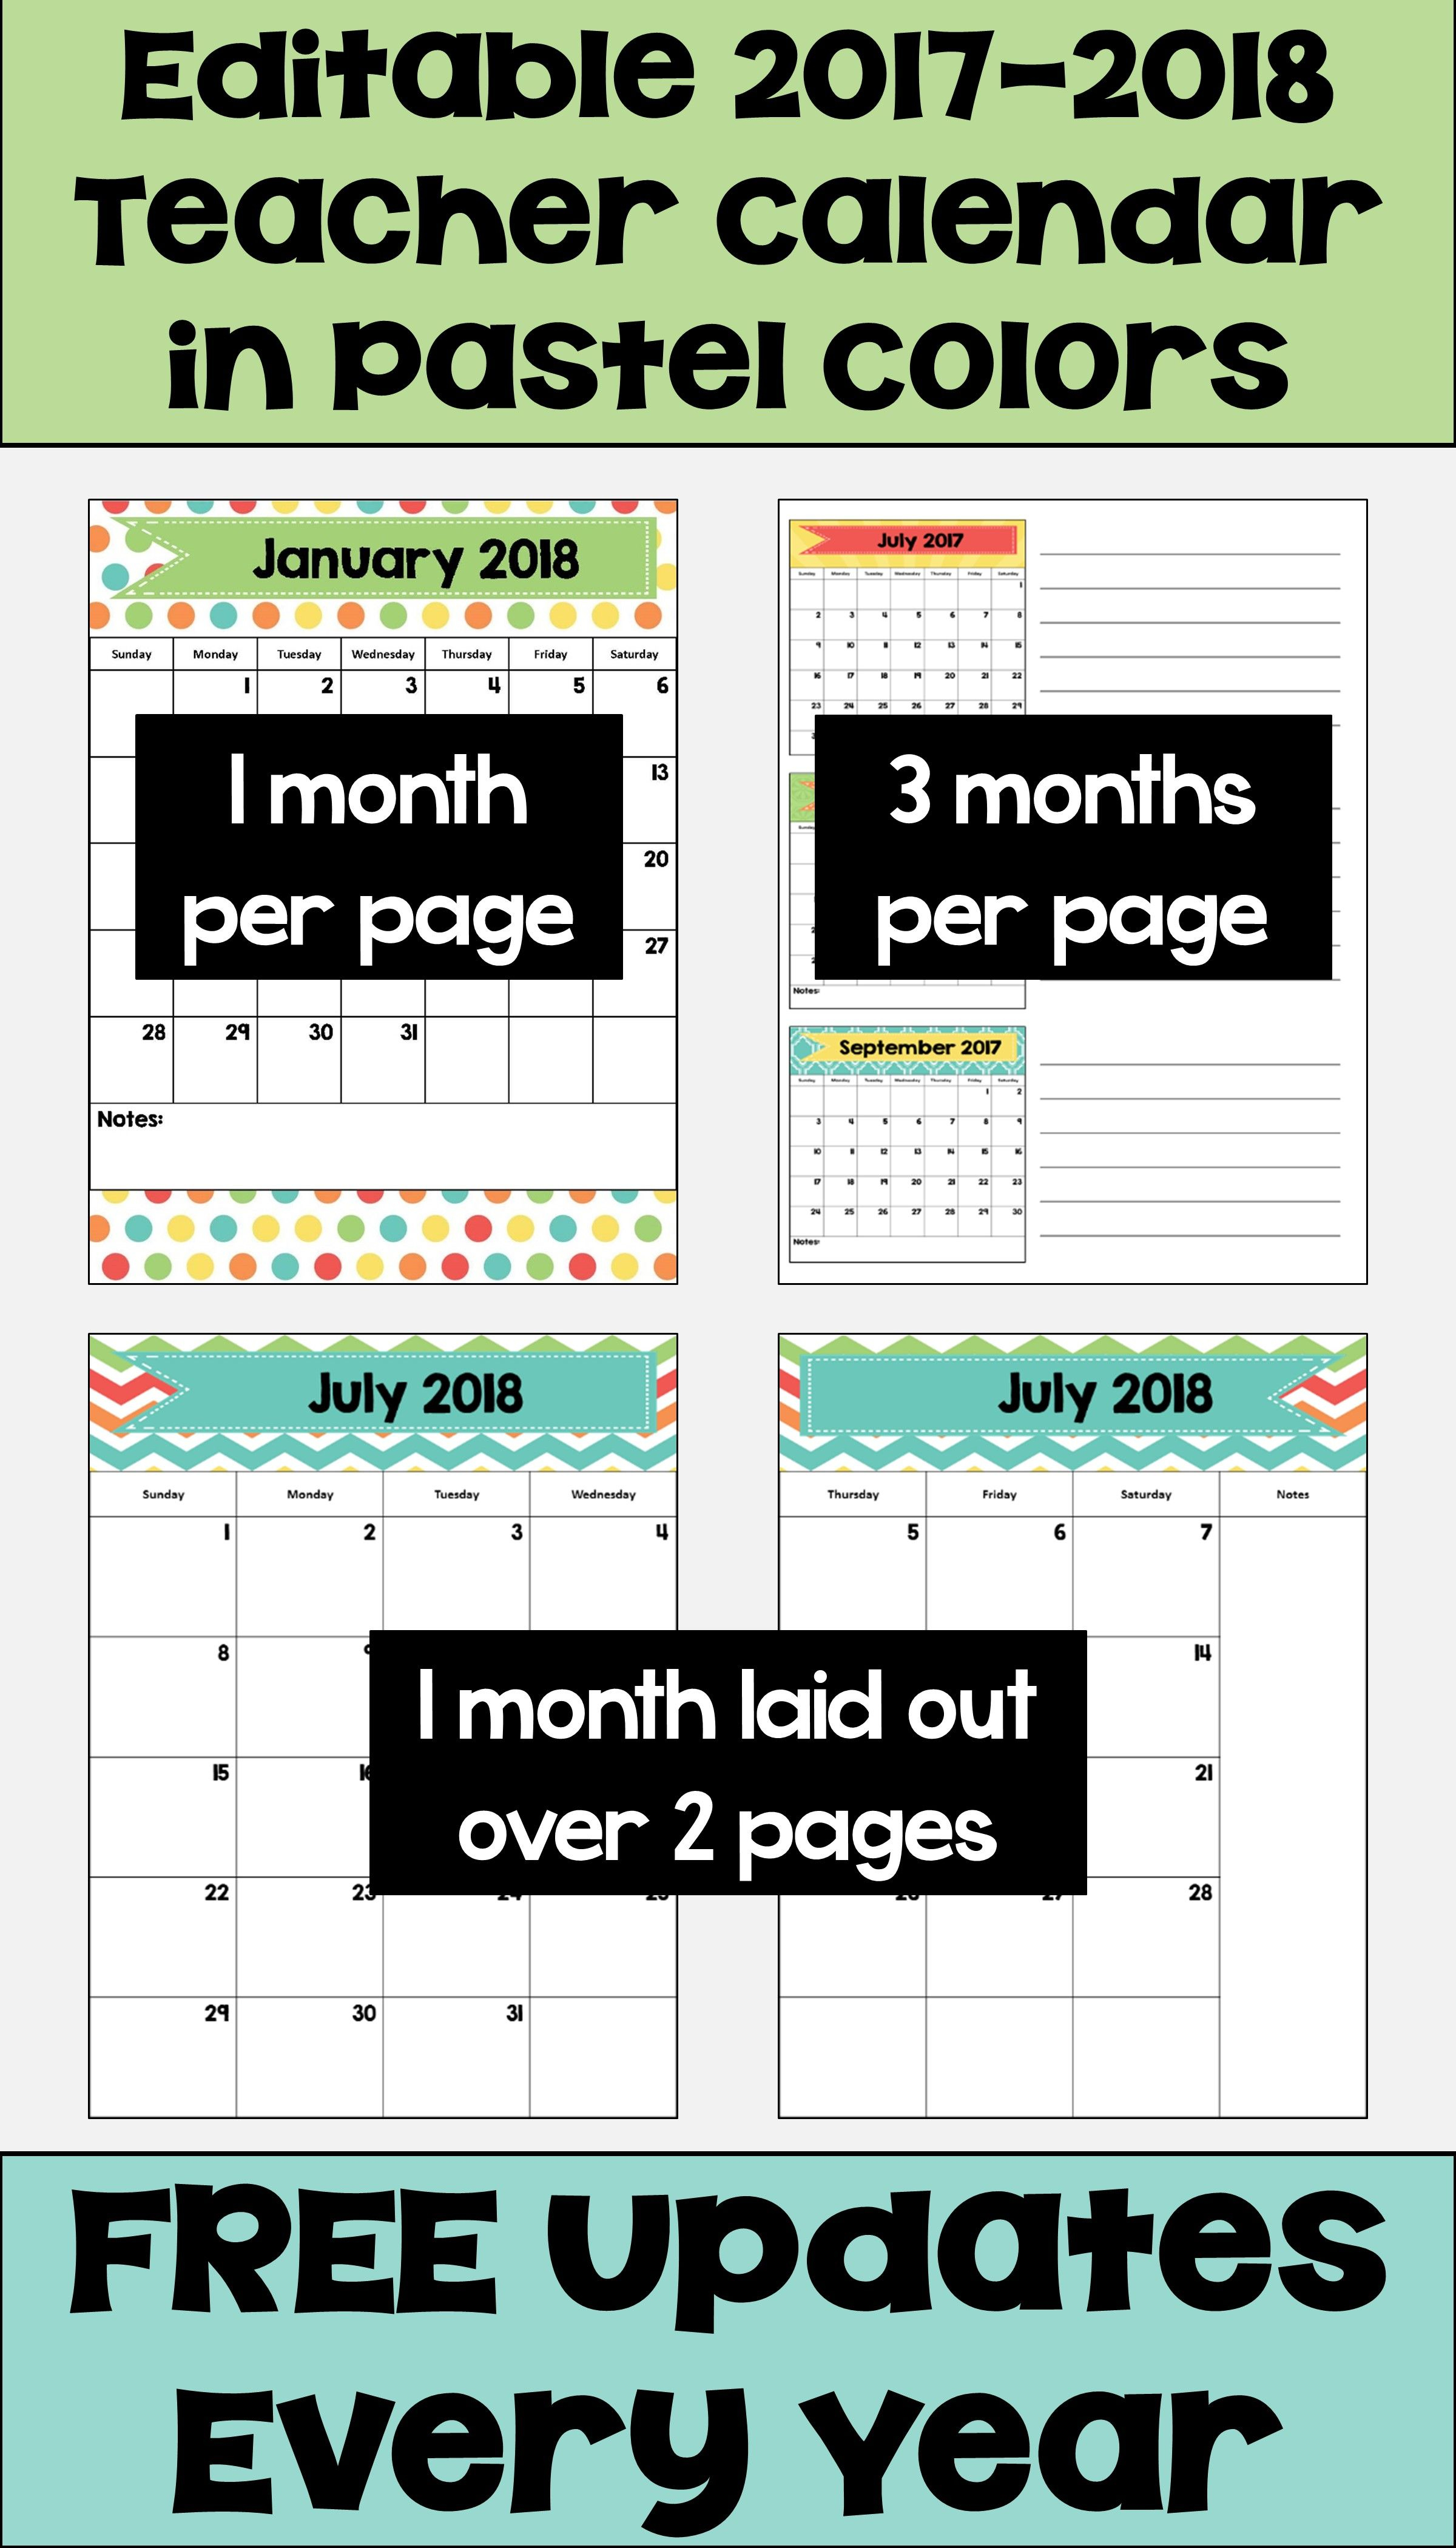 Editable Calendar 2019-2020 With Free Updates In Pastel